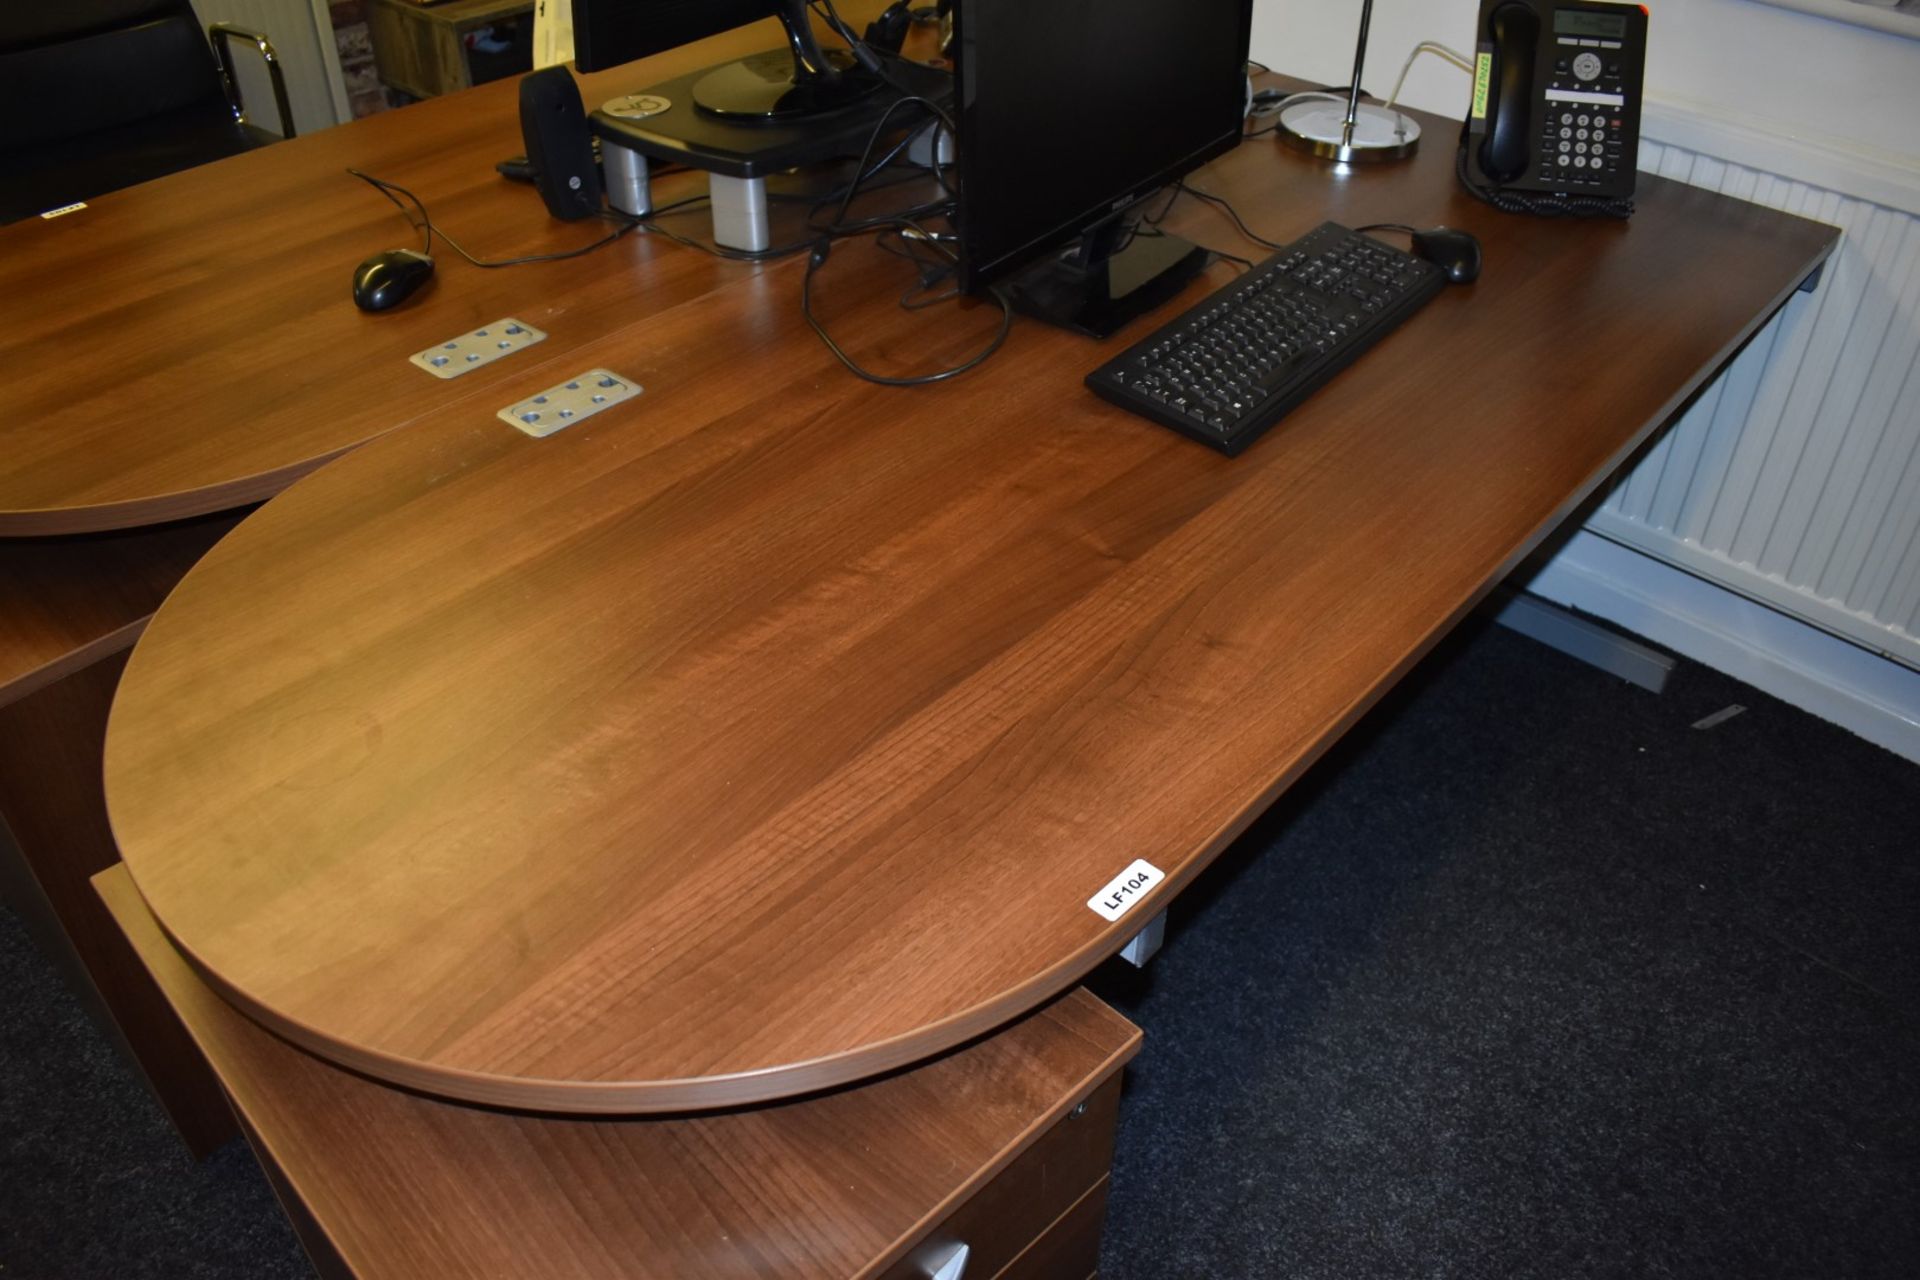 1 x Contemporary Office Desk - Features Semi Circle Meeting Point, Walnut Finish and Matching Drawer - Image 4 of 6